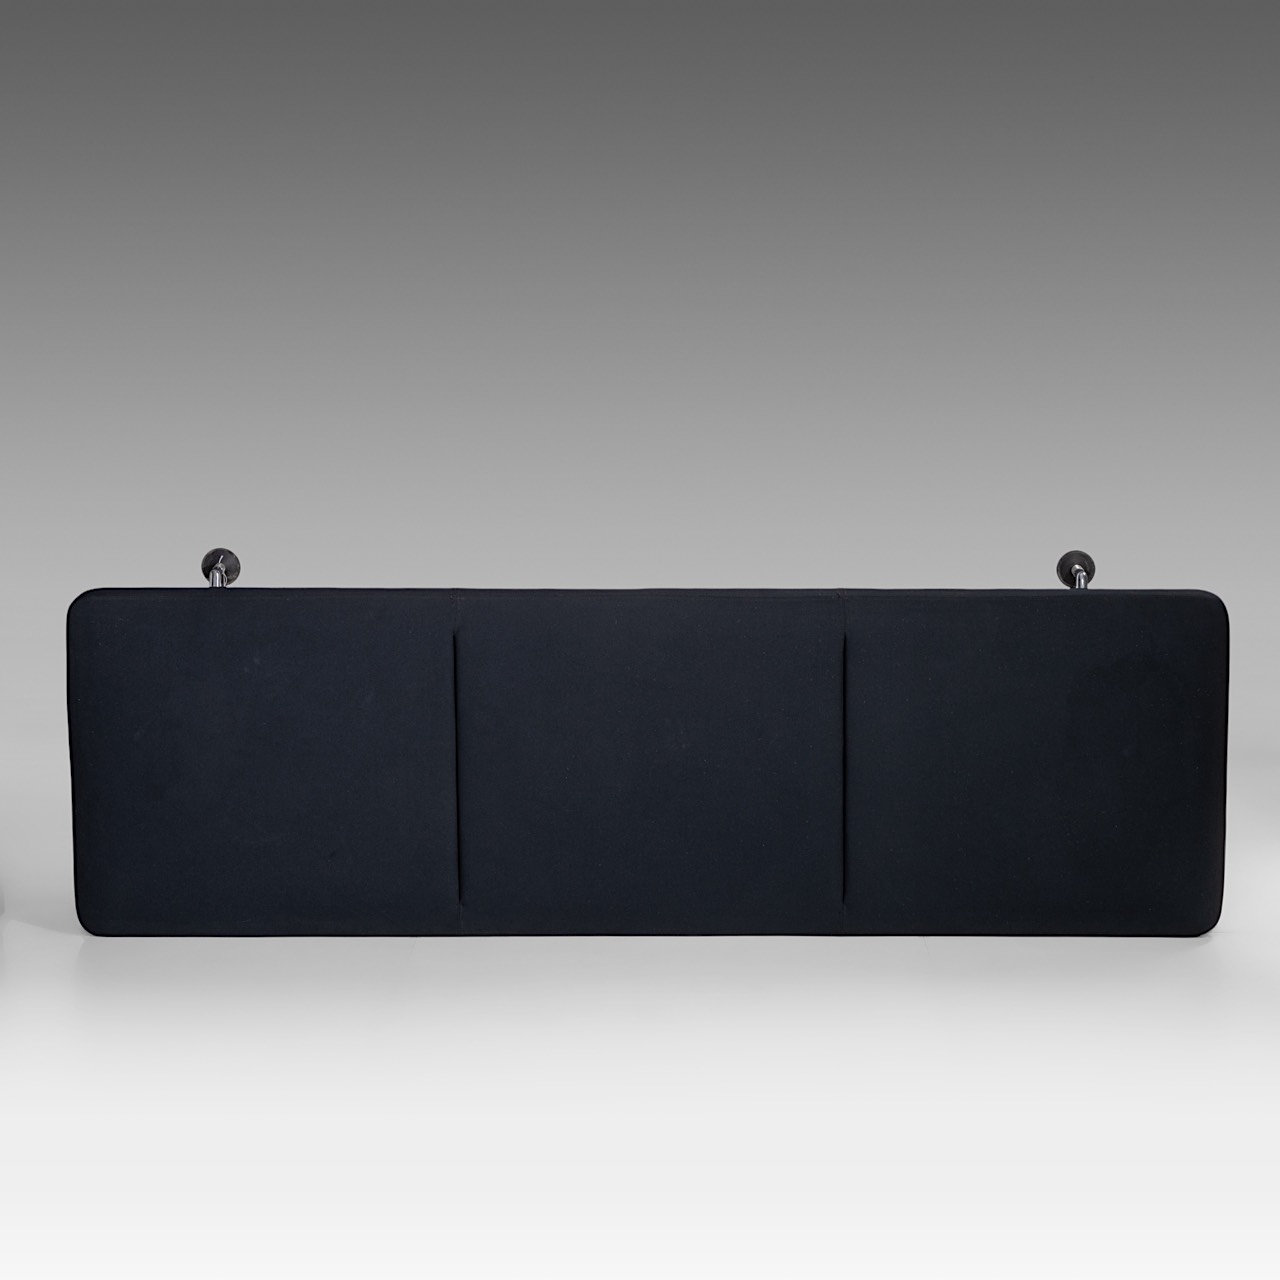 A pair of Antonio Citterio daybeds for Vitra, H 42 - W 222 - D 68 cm - Image 6 of 8